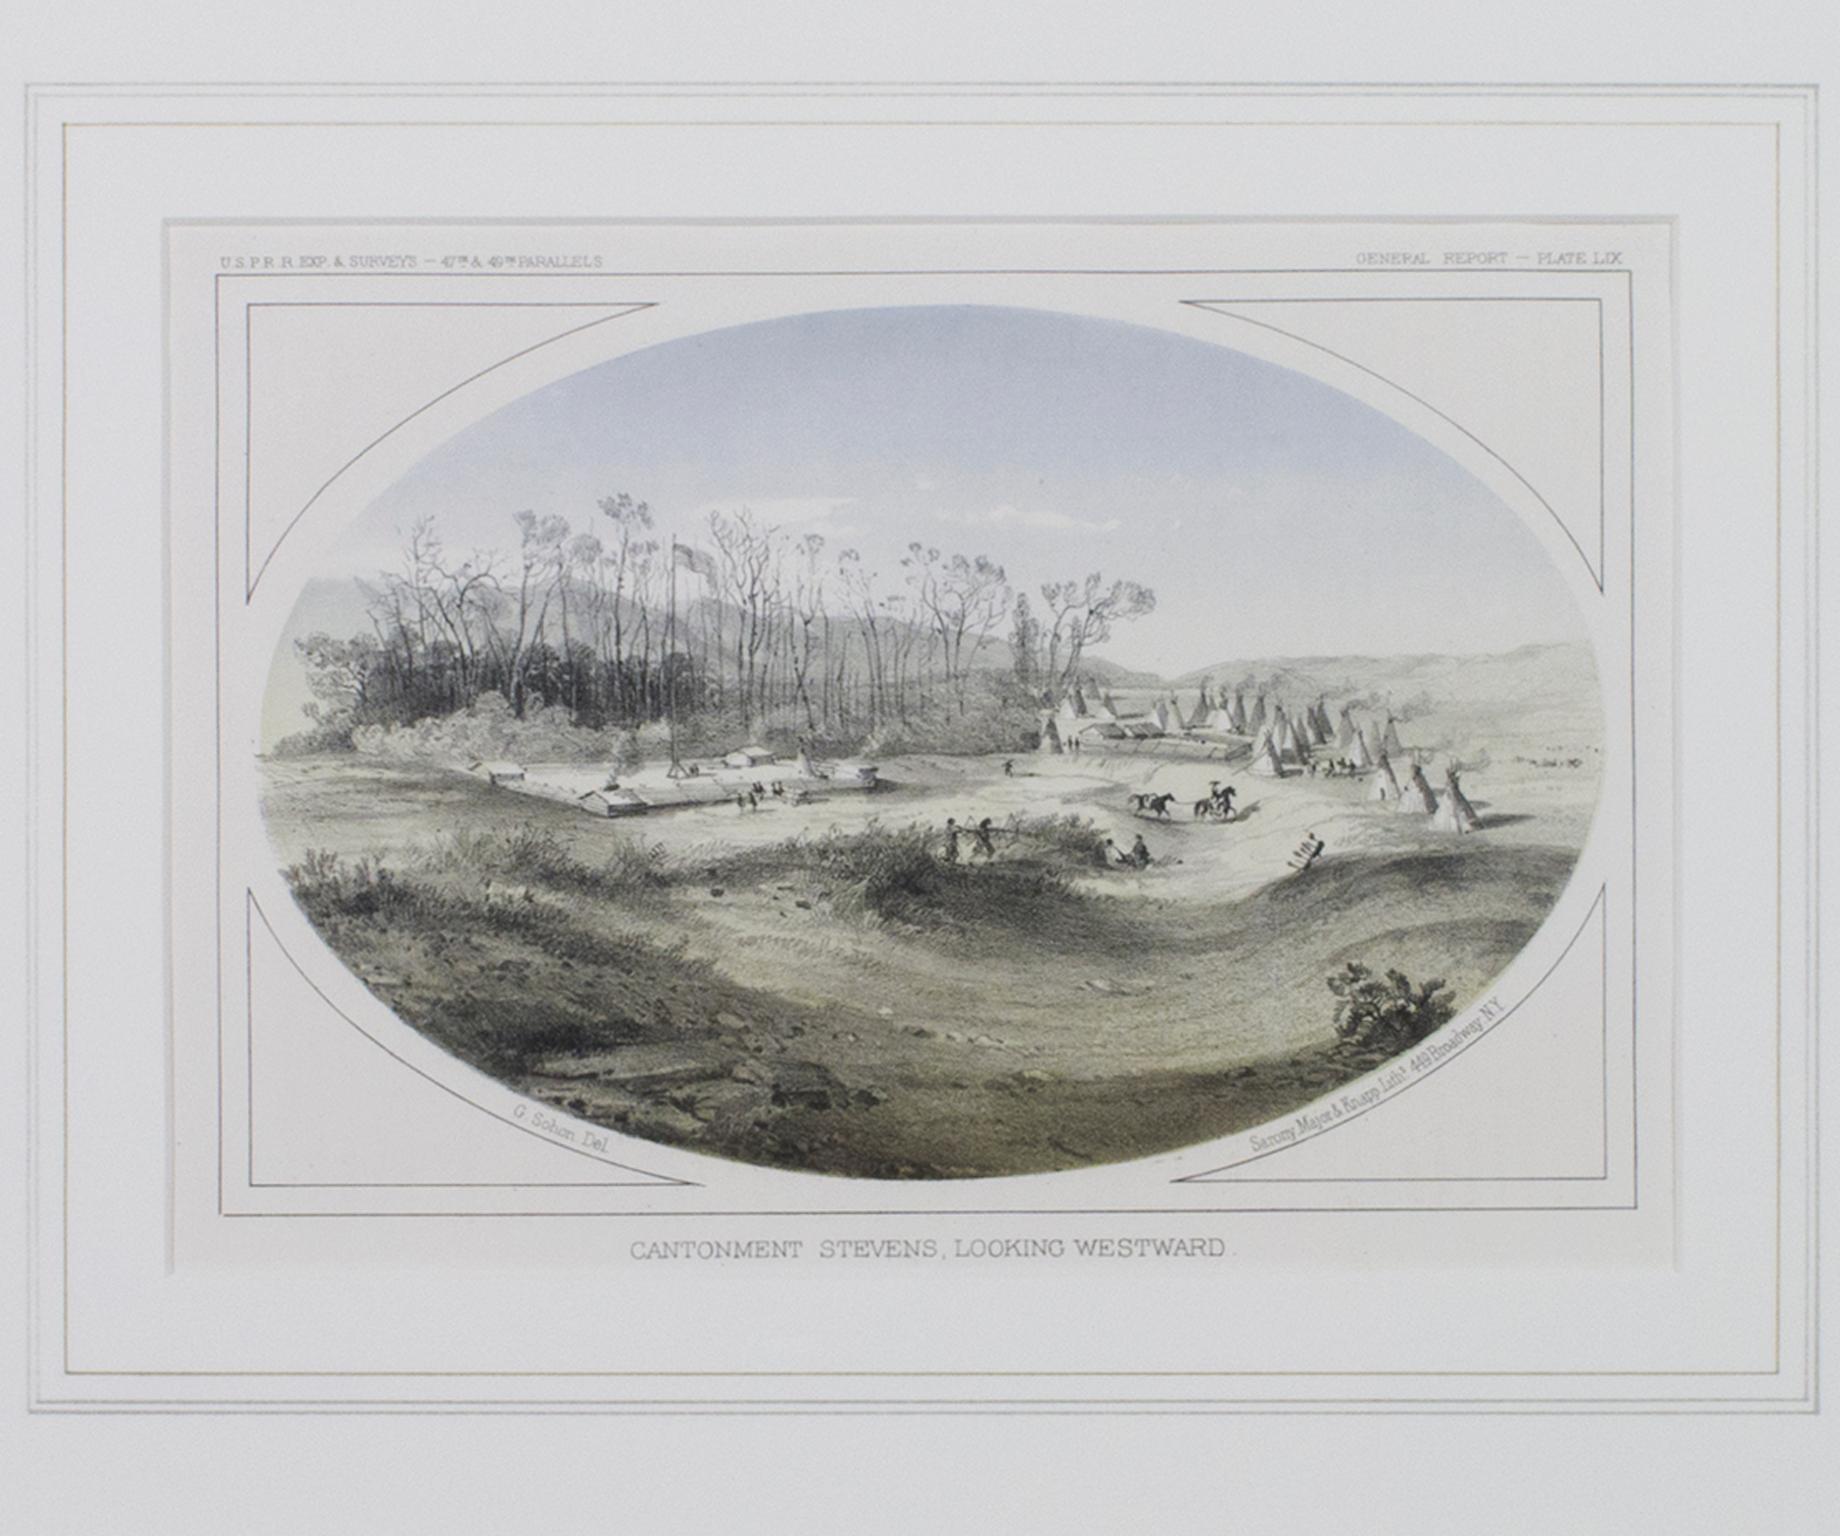 "Cantonment Stevens, Looking Westward, " Hand-colored Lithograph by G. Sohon